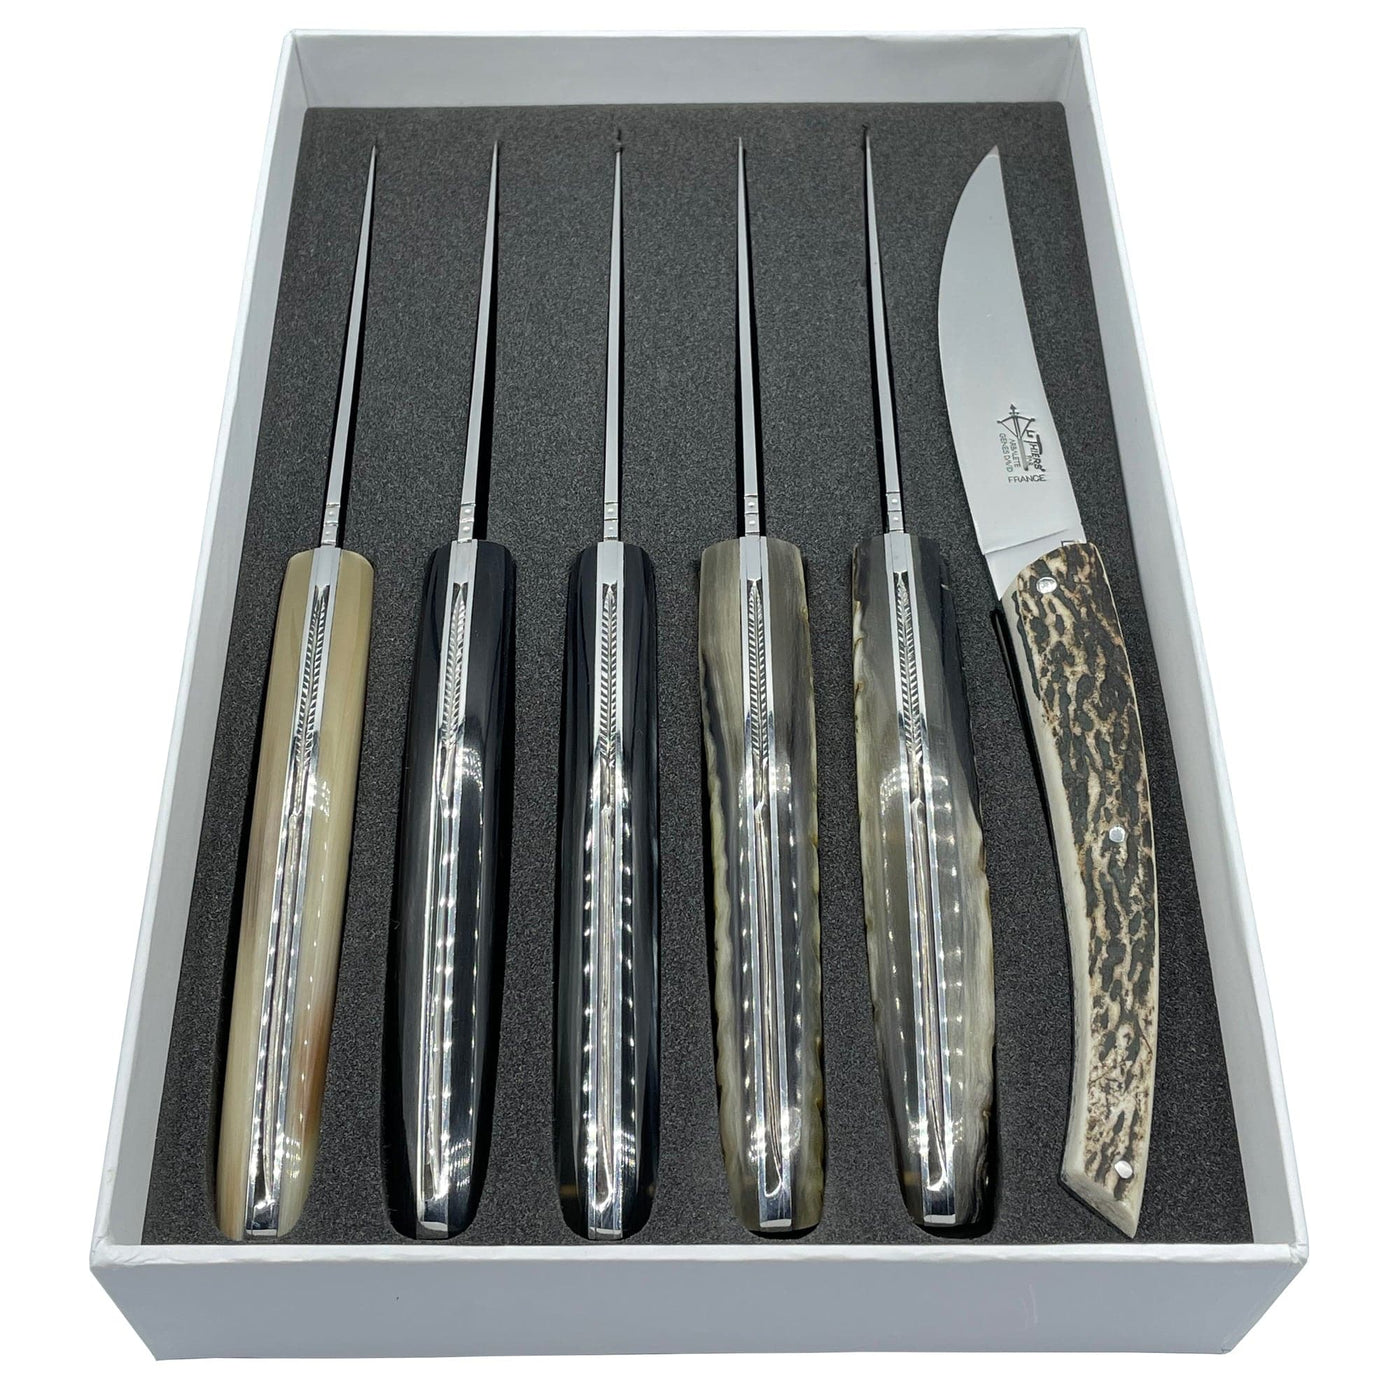 Arbalete Genes David Luxury Fully Forged Steak Knives 6-Piece Set with Full Mixed Horn Handles, 4.25-Inches - Kitchen Universe